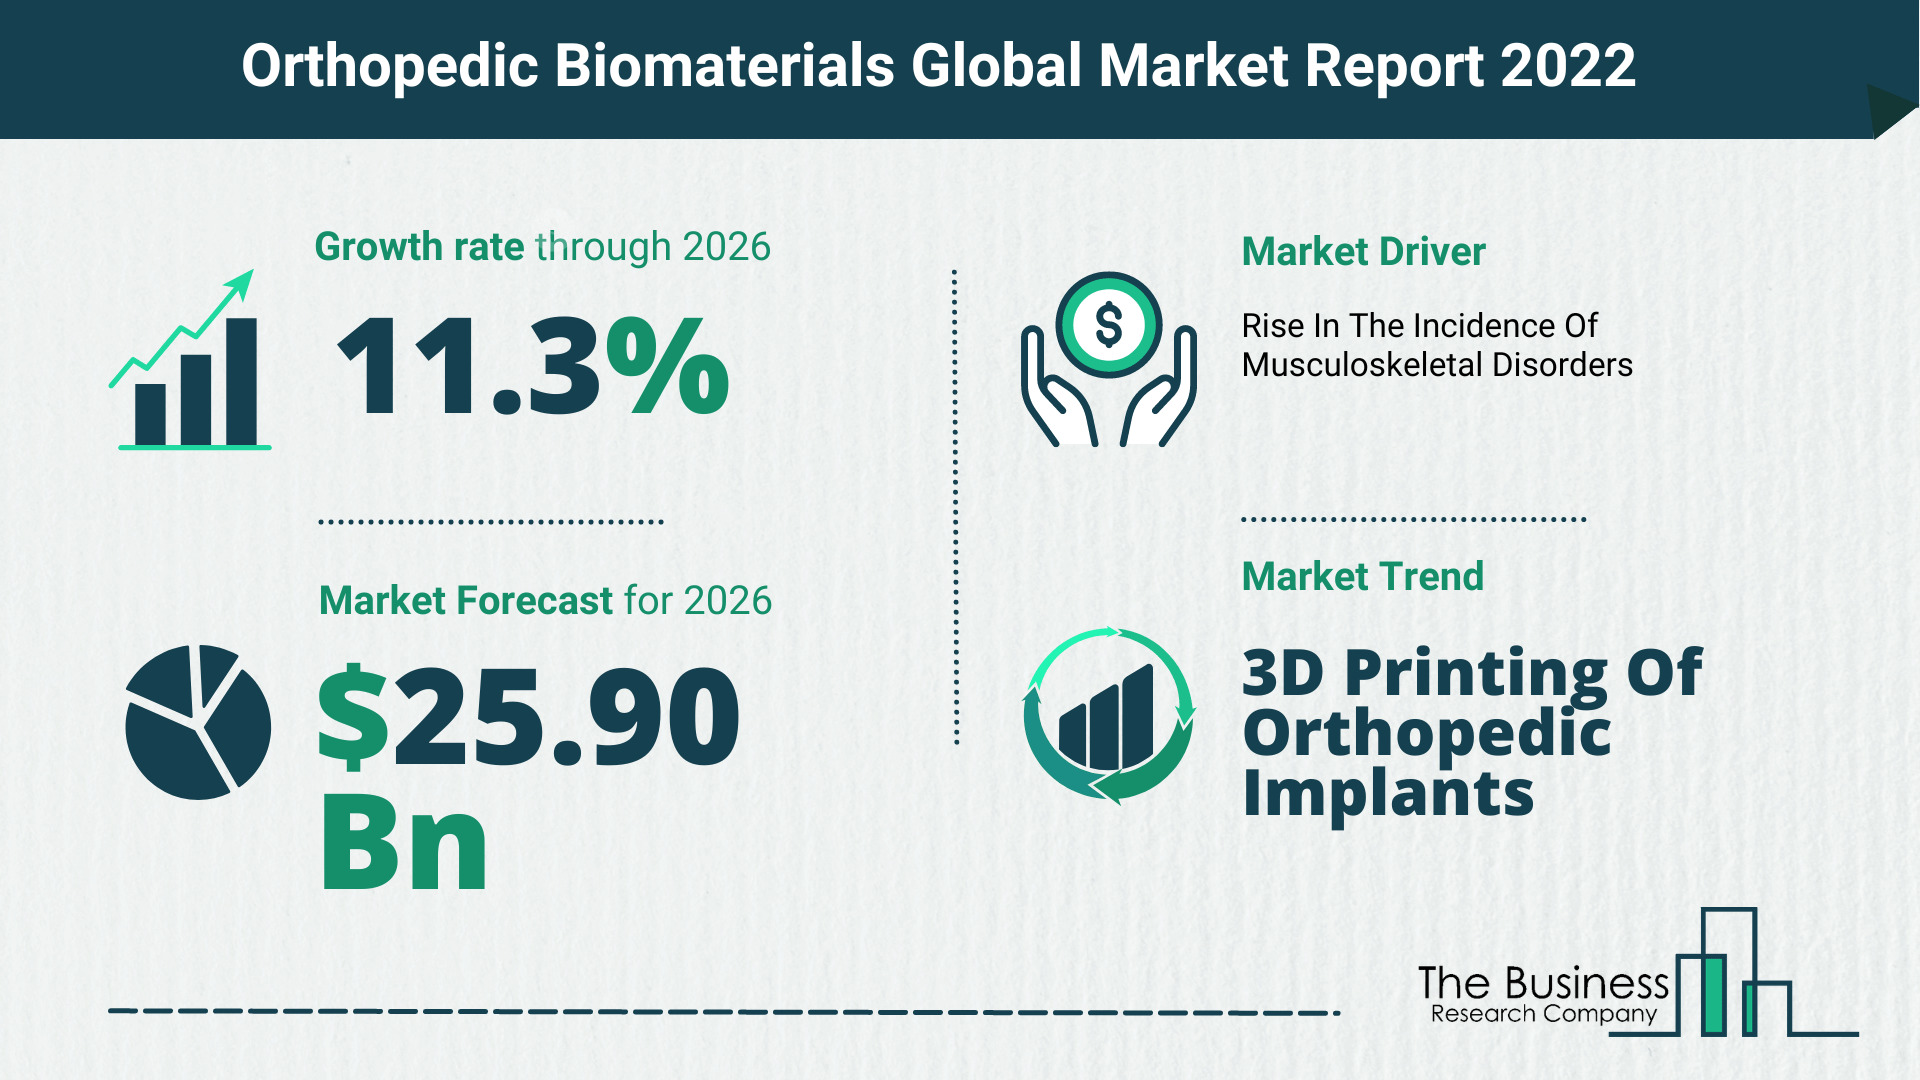 The Orthopedic Biomaterials Market Share, Market Size, And Growth Rate 2022